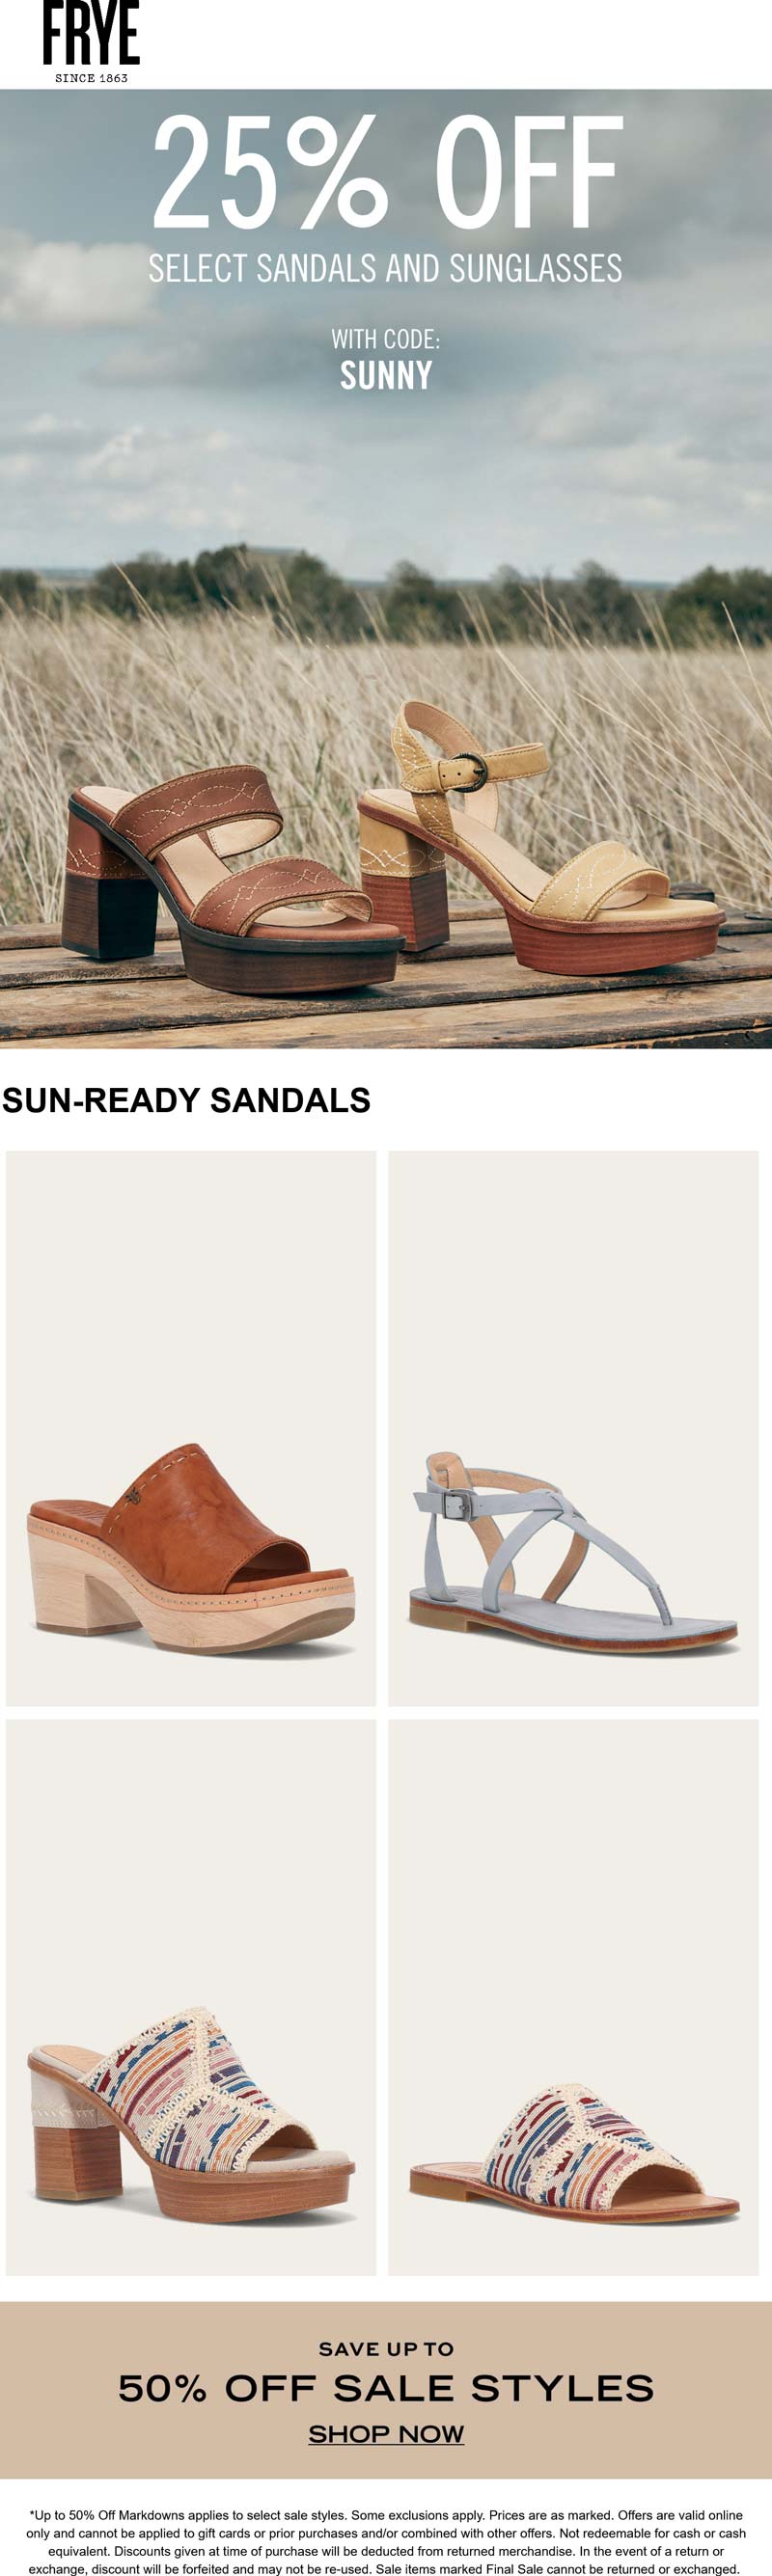 Frye stores Coupon  25% off summer sandals & sunglasses at Frye via promo code SUNNY #frye 